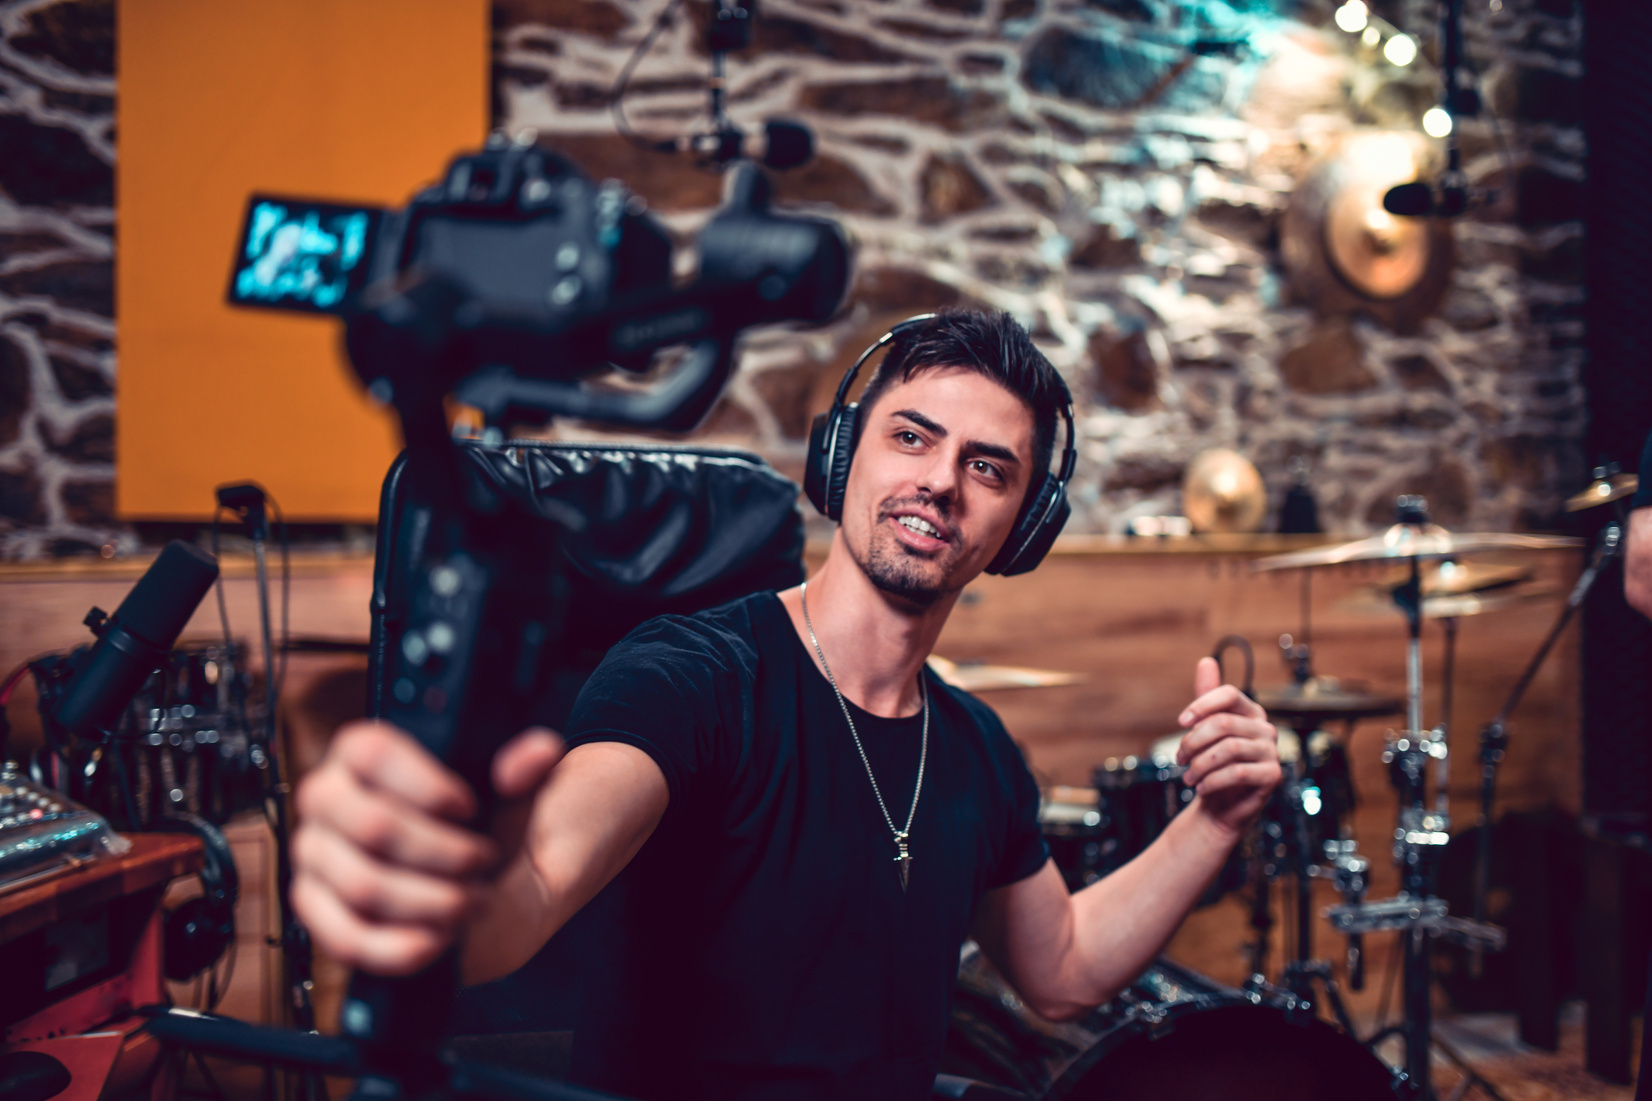 Music Producer Creating Promotional Content Video About His Studio Equipment